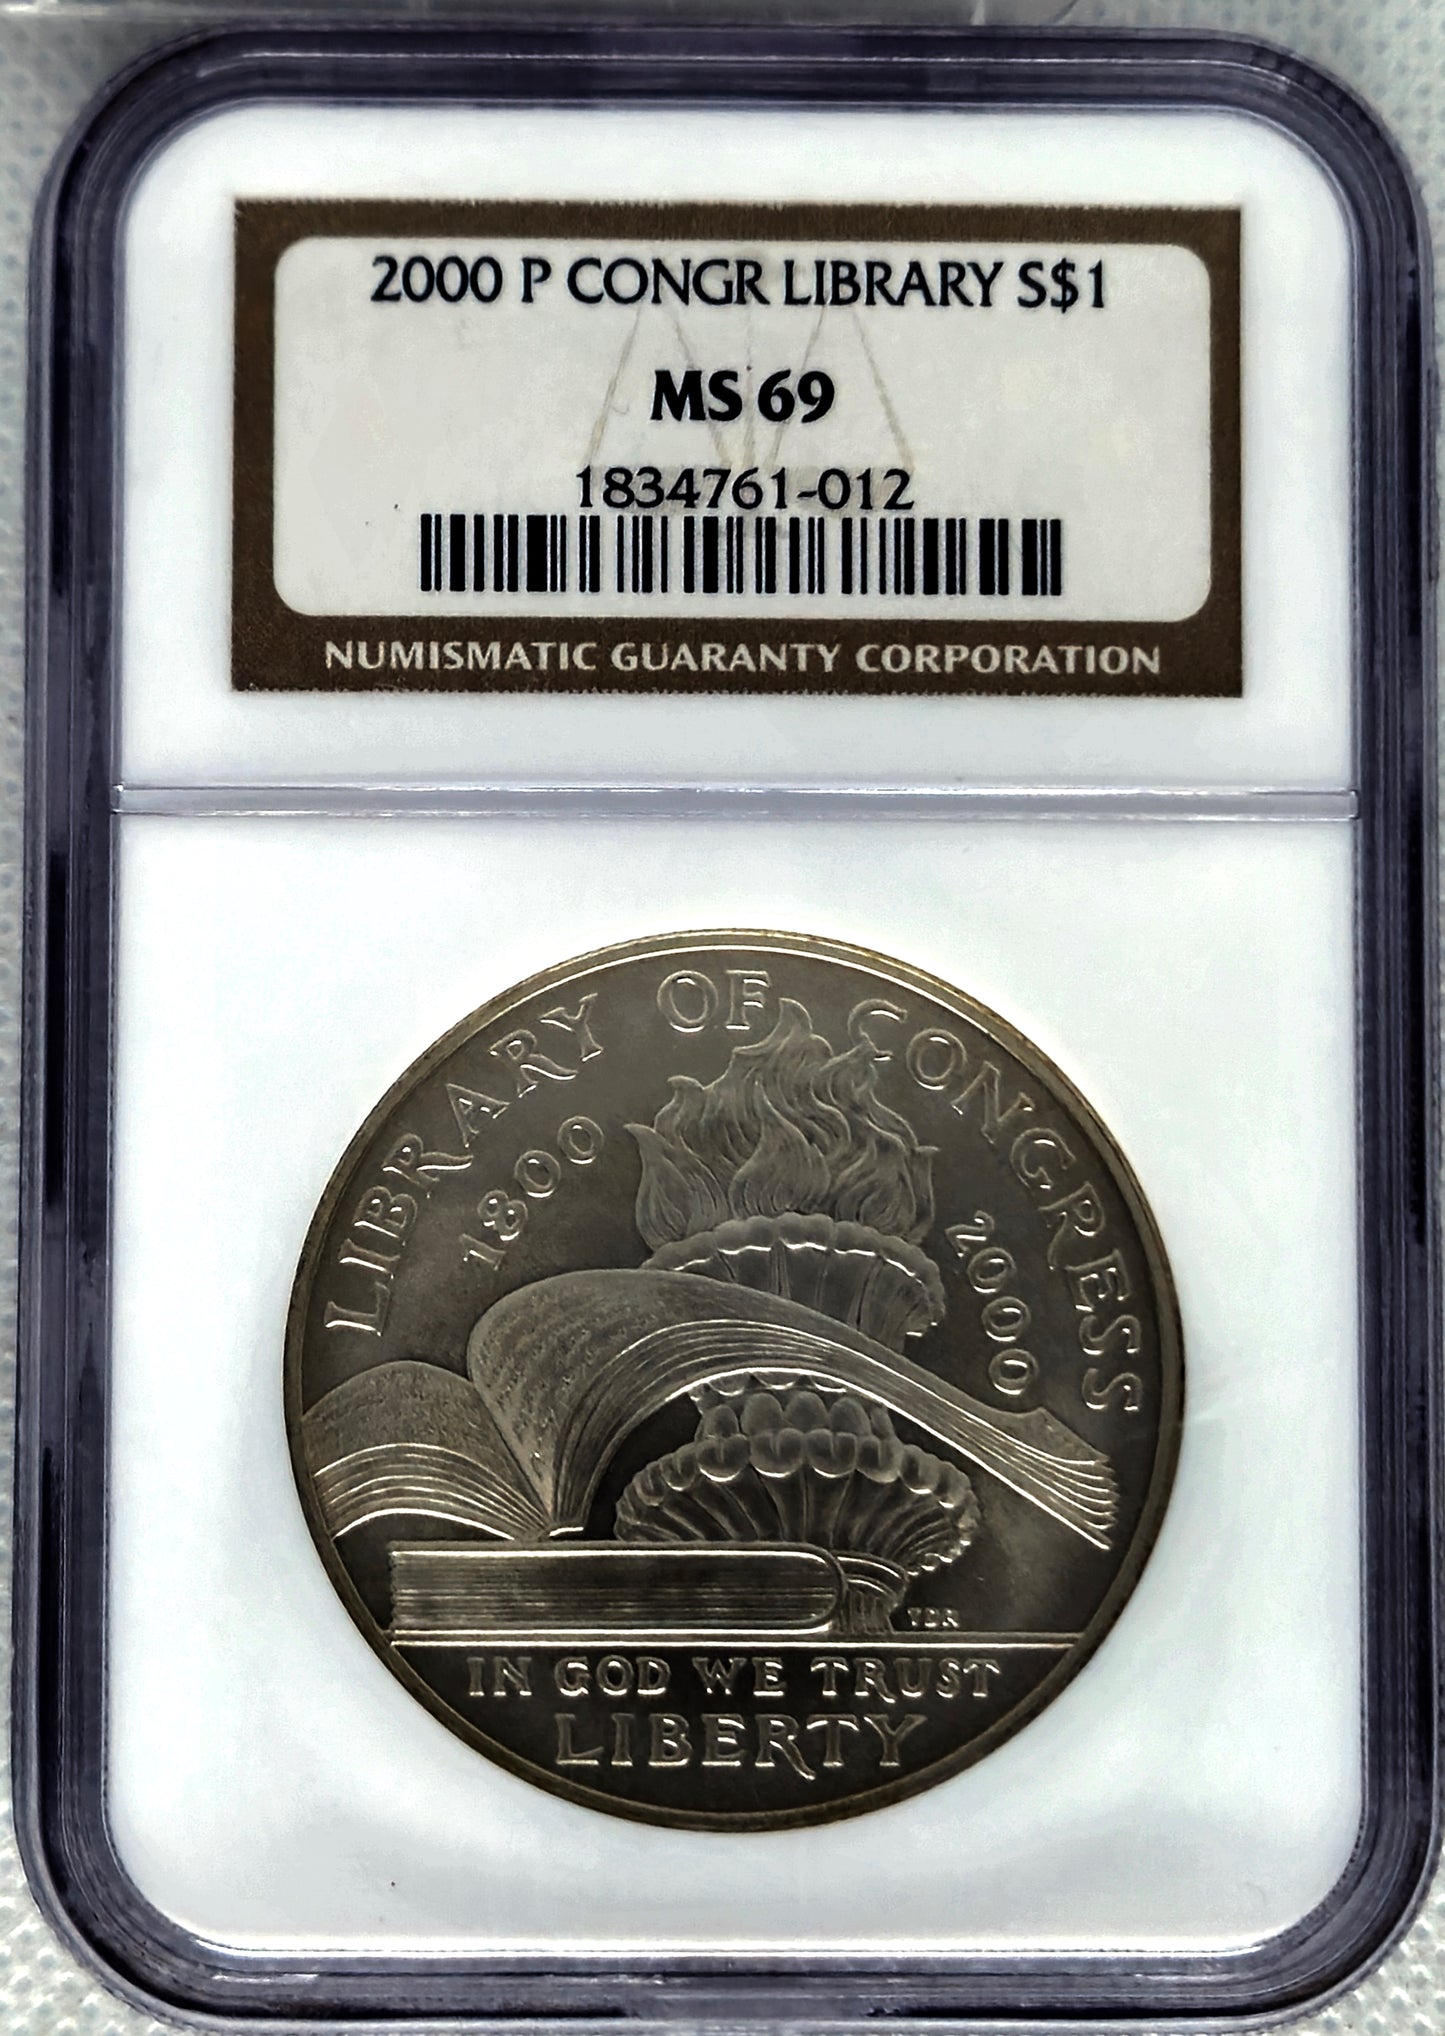 2000-P Library of Congress NGC MS 69 Commemorative SILVER DOLLAR